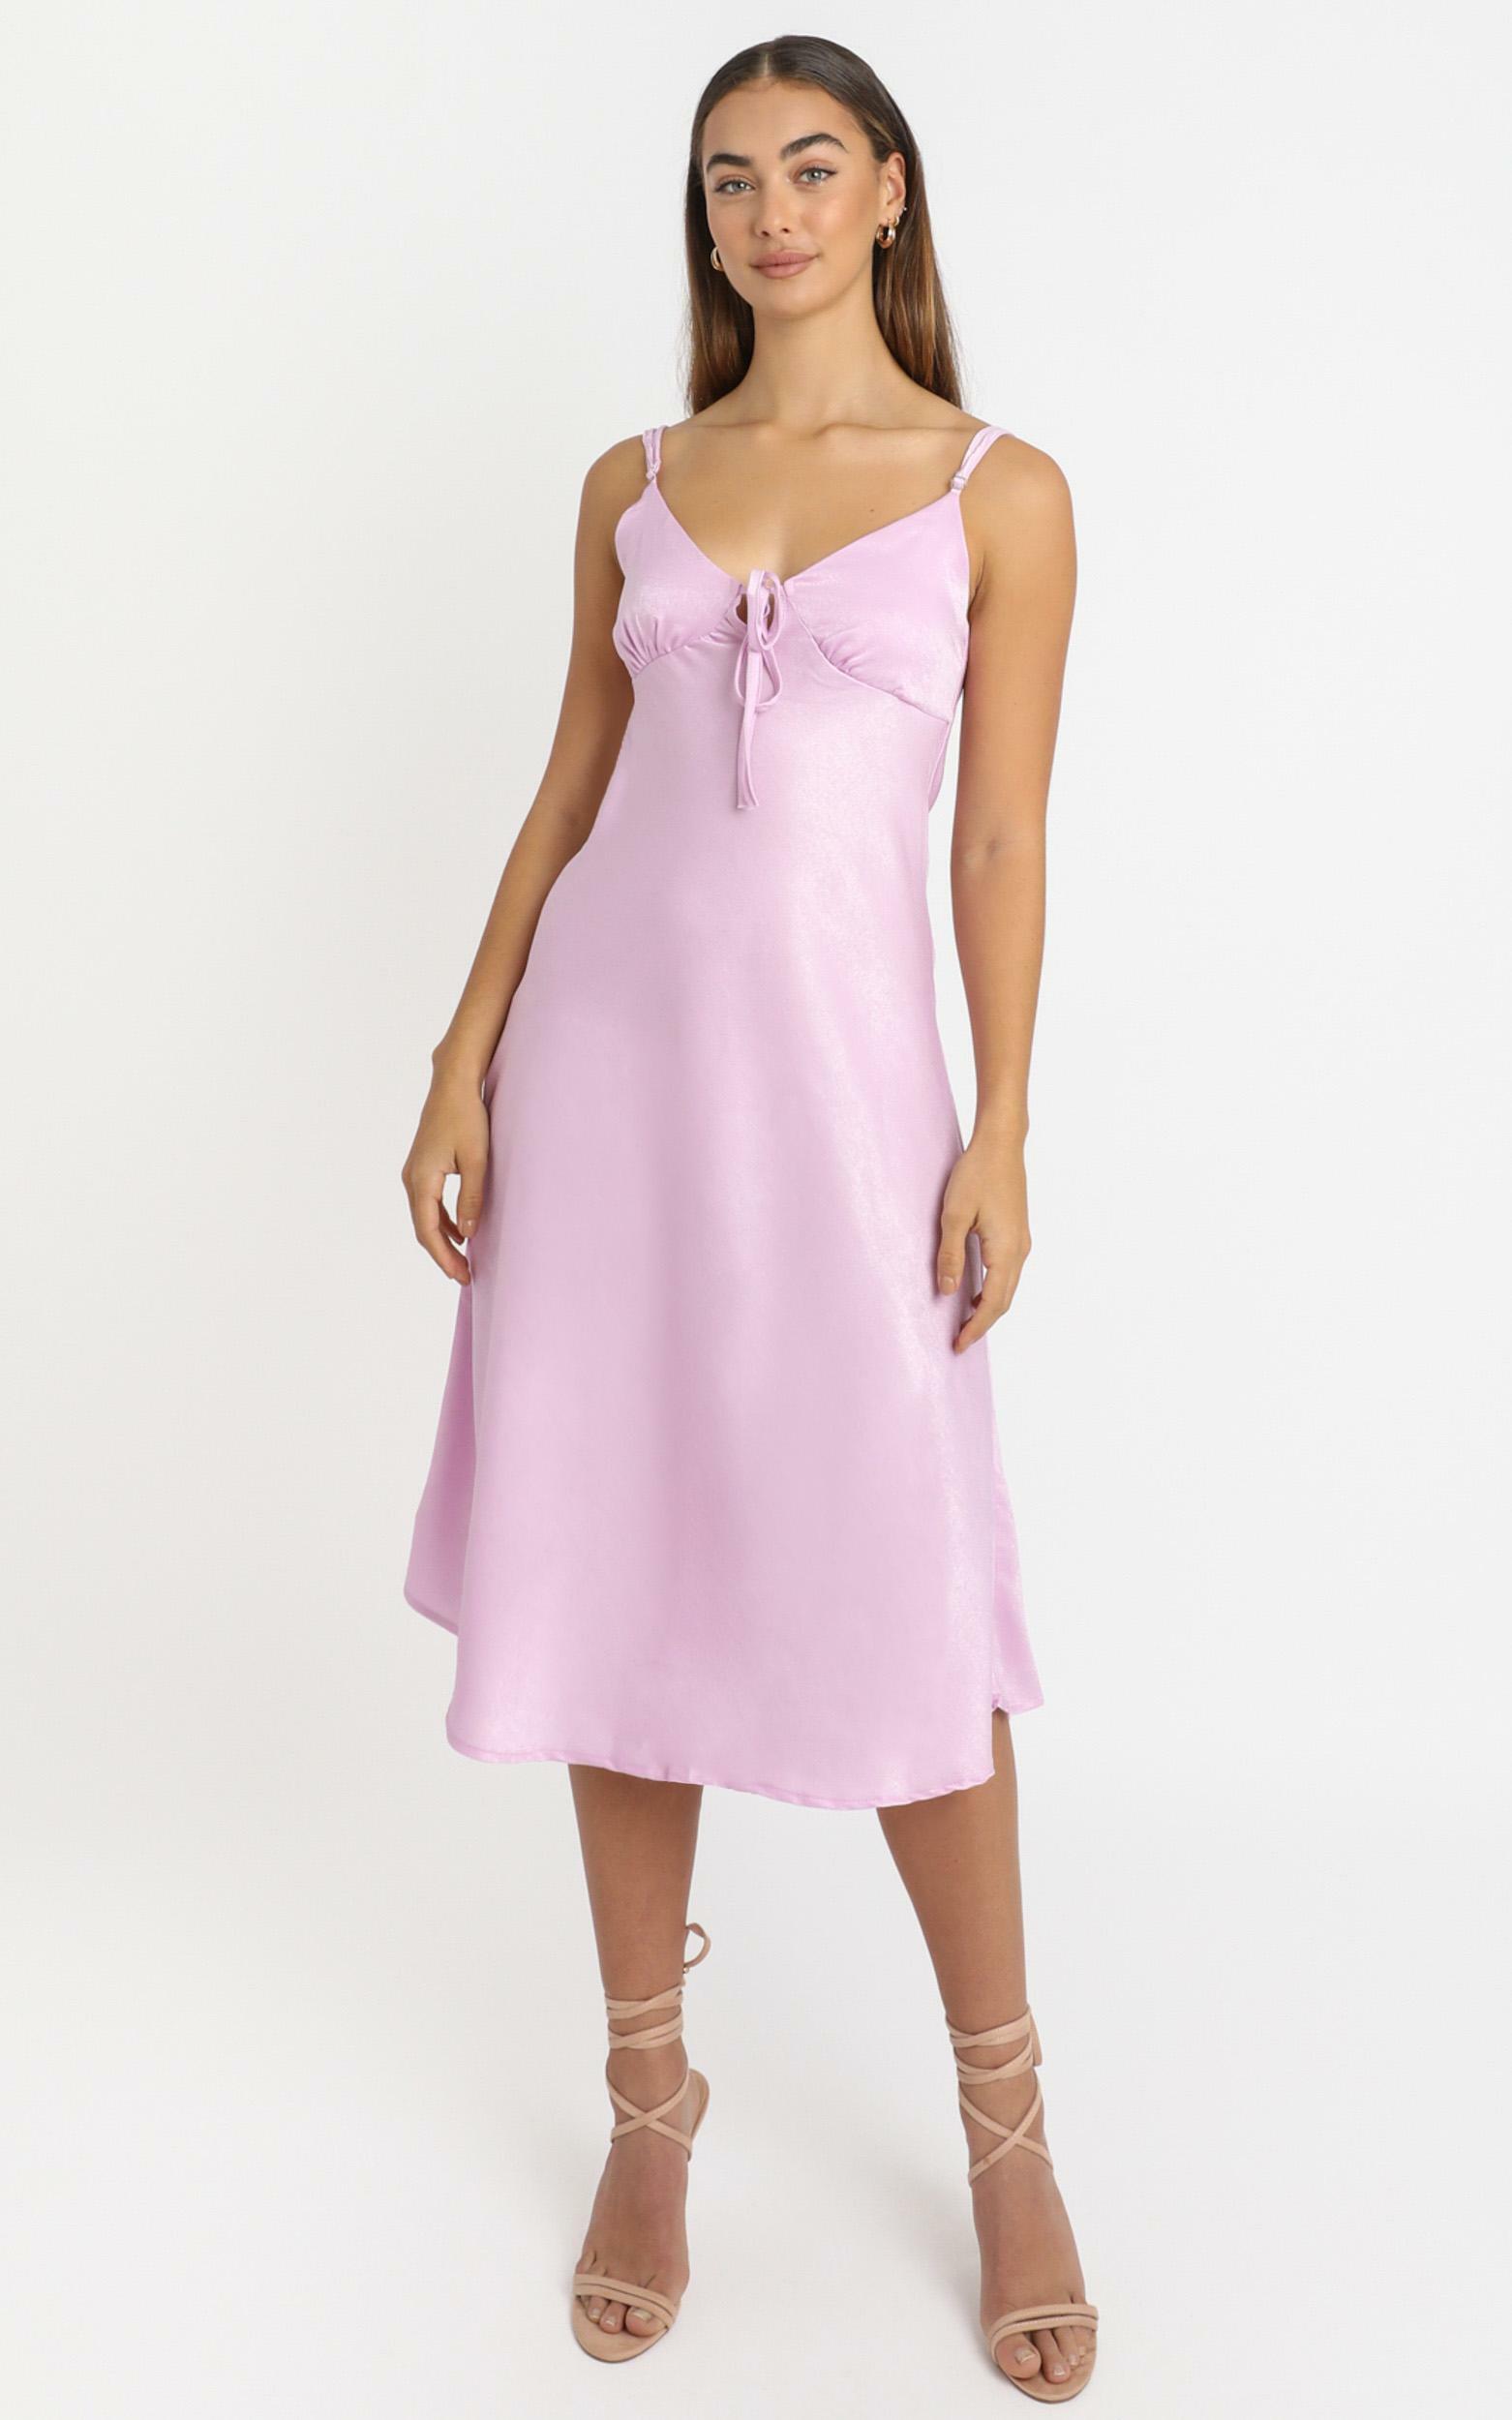 Toss The Dice dress in lilac - 16 (XXL), PRP1, hi-res image number null